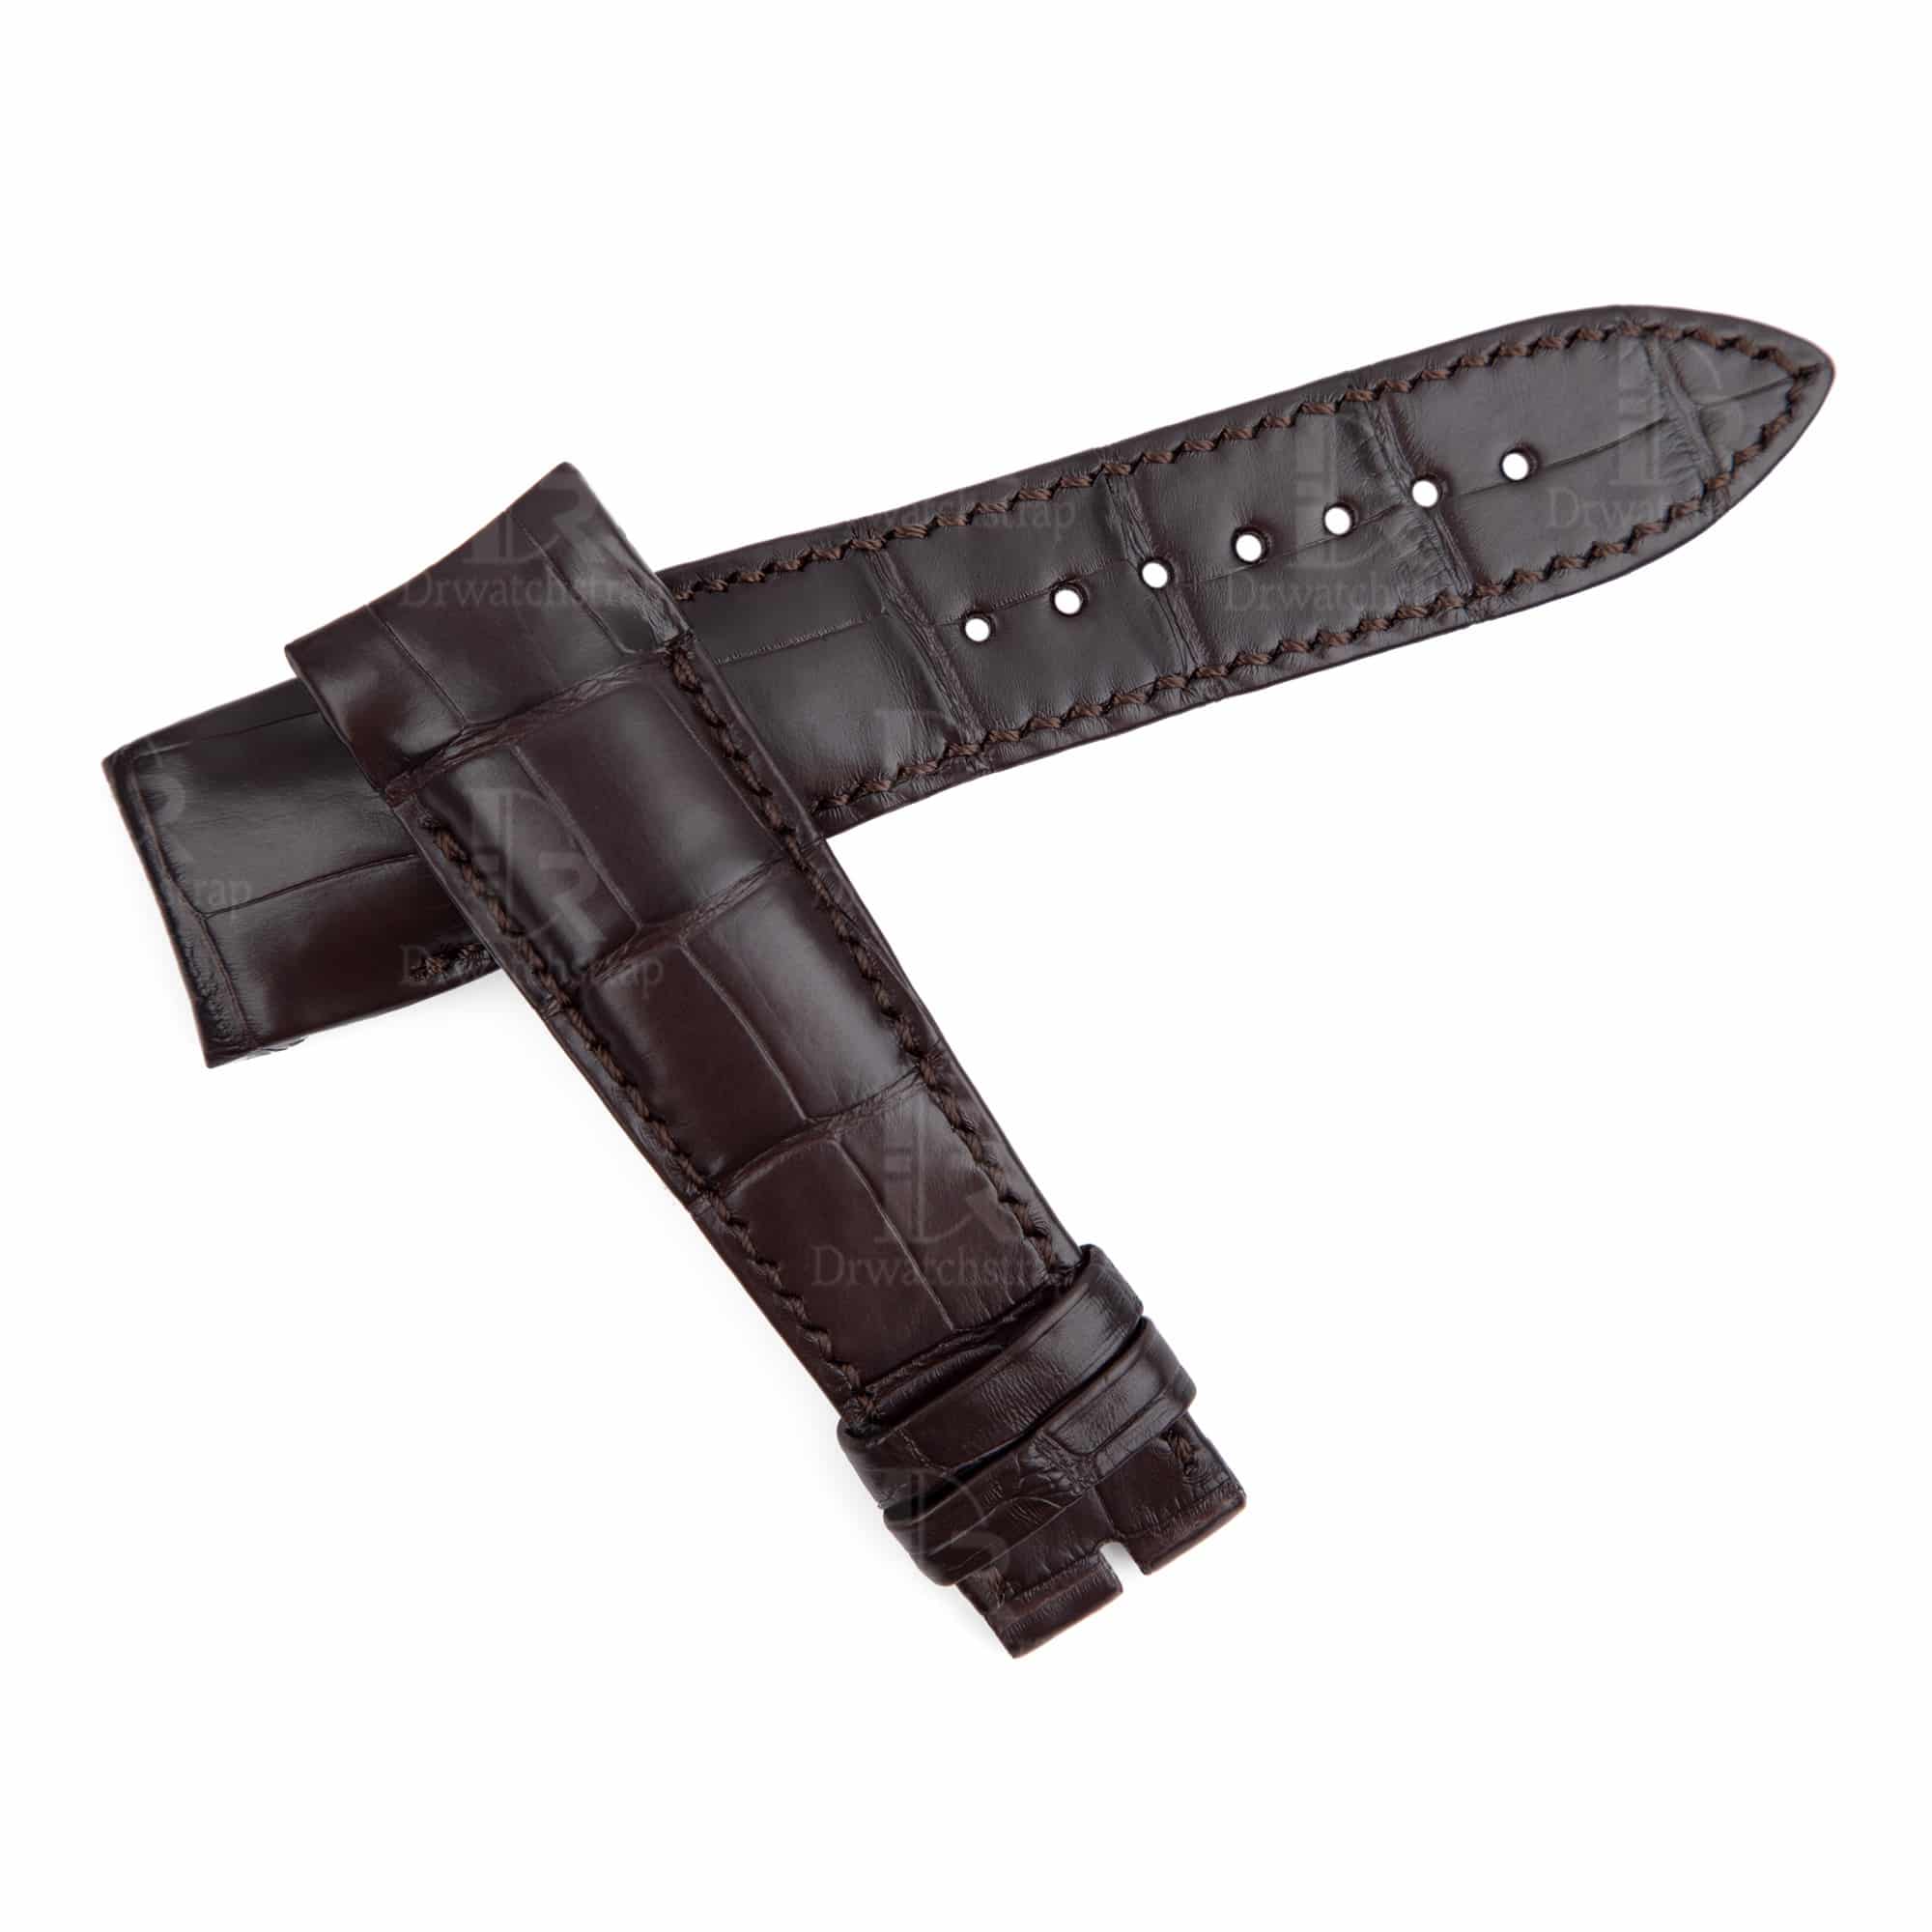 Custom handmade Breguet type xxi strap and watch band for Breguet type xxi flyback chronograph 3810 luxury watches - aftermarket leather straps craftsmanship Black Brown Grade A American Crocodile watch bands for sale at low price